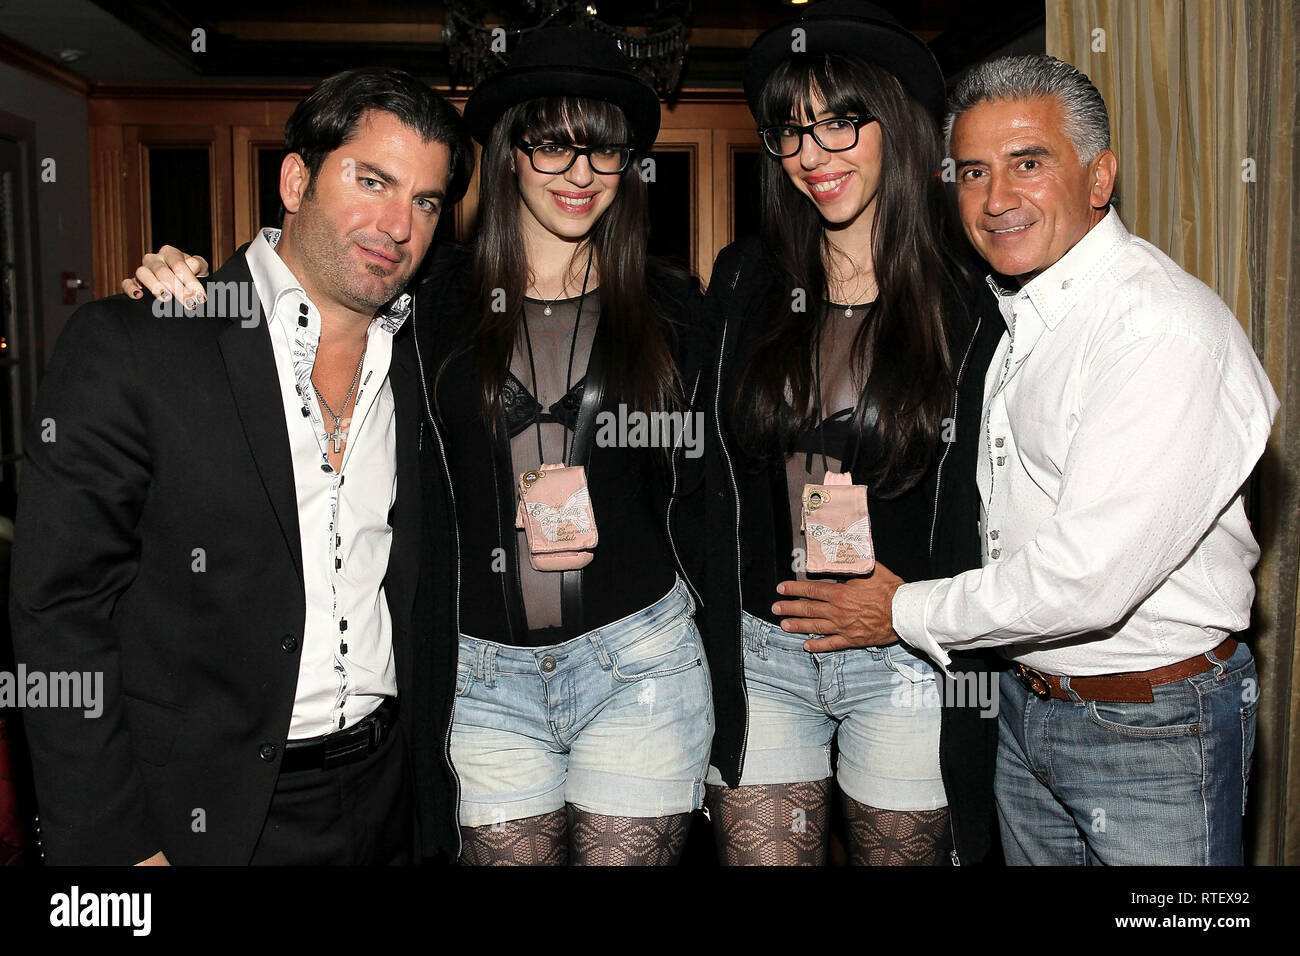 New York, USA. 17 Feb, 2011. Peter Petrakis, Ornela Samuels, Odelia Samuels, Jerry Kokkinos at The Blonds - After Party during Fall 2011 Mercedes-Benz Fashion Week at RdV Lounge in New York, USA. Credit: Steve Mack/S.D. Mack Pictures/Alamy Stock Photo